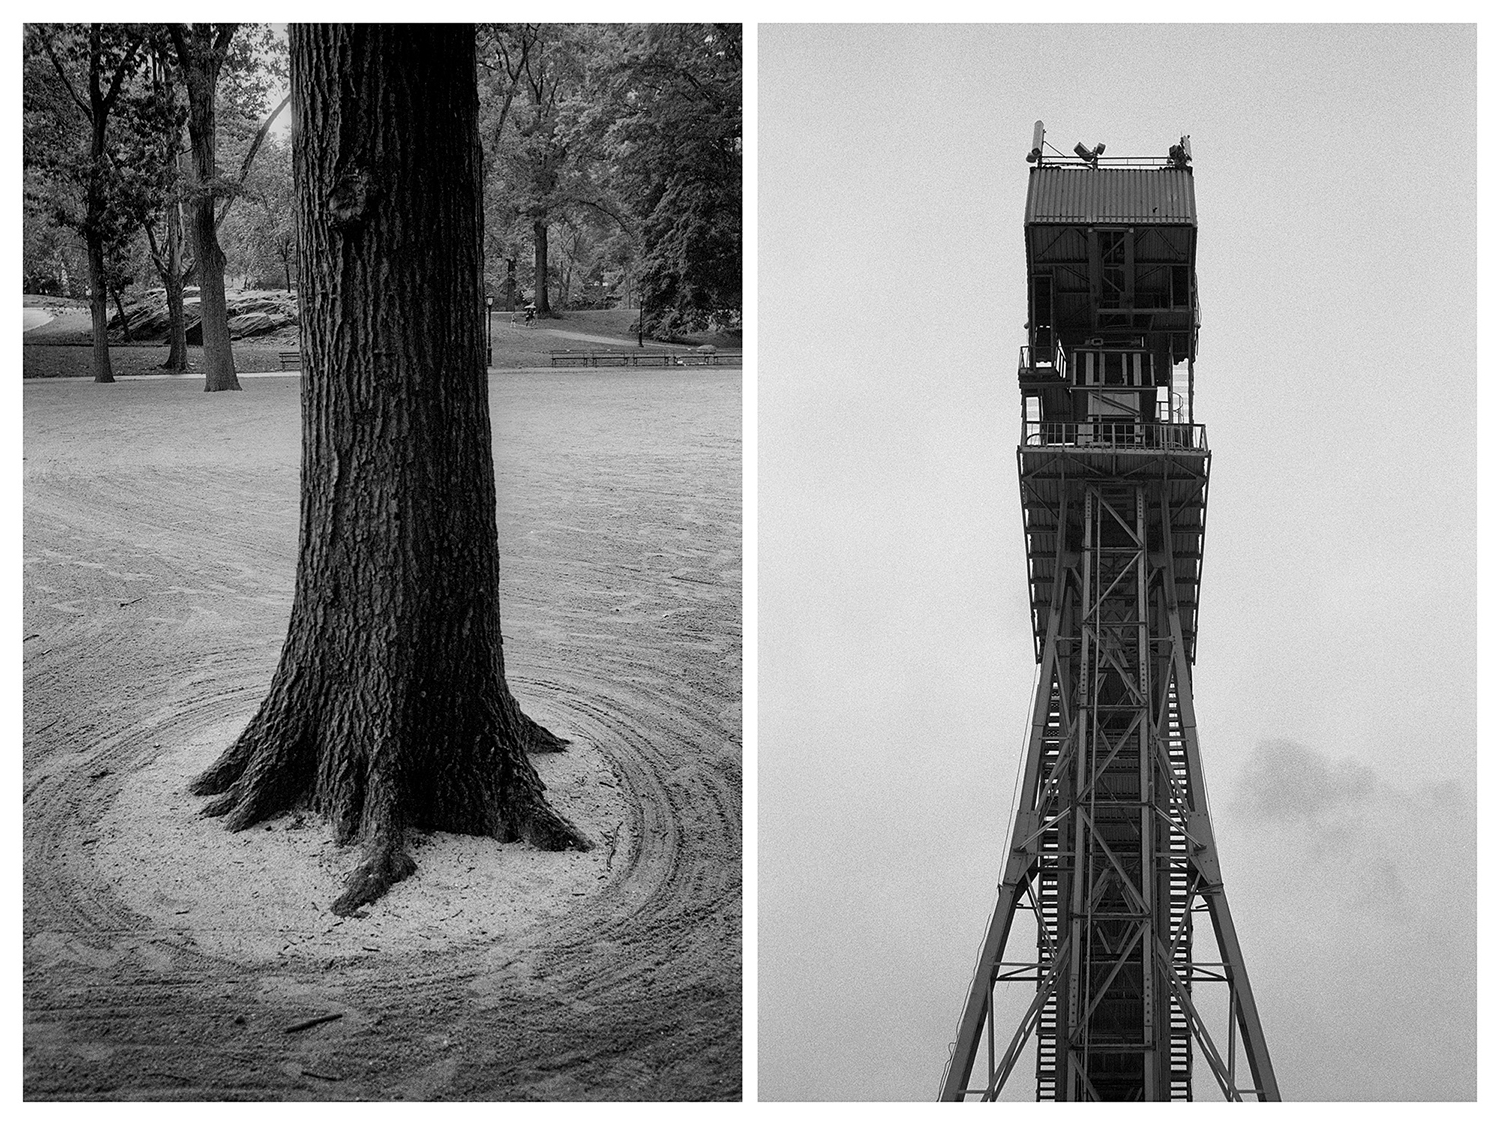 New York – A tree trunk surrounded by circles in Central Park. Moscow – Ski jump at Sparrow Hills.  Credit: Artur Bondar